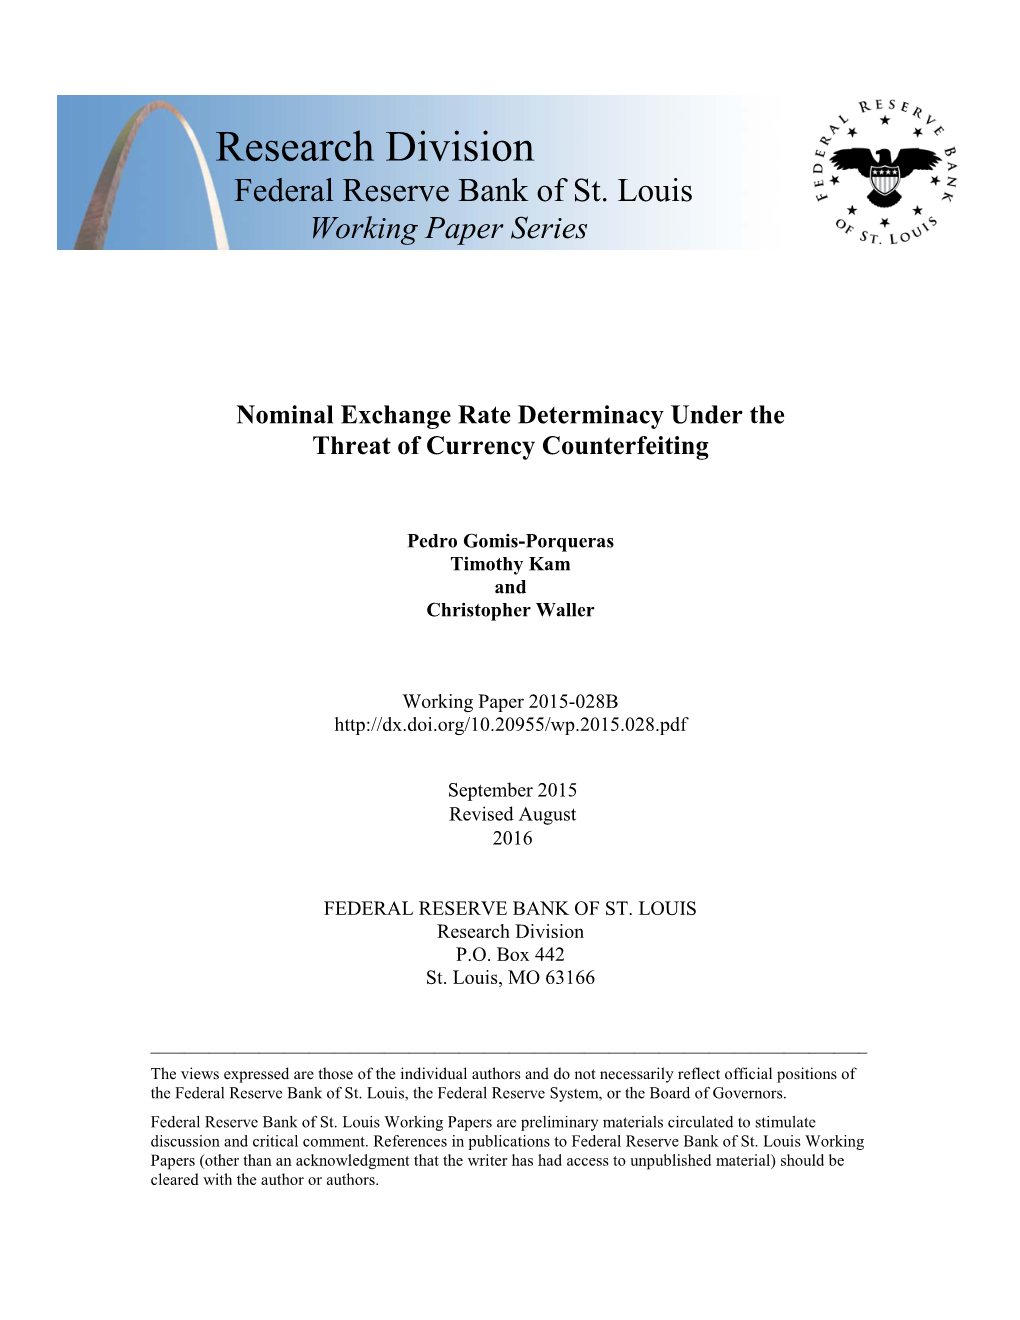 Nominal Exchange Rate Determinacy Under the Threat of Currency Counterfeiting